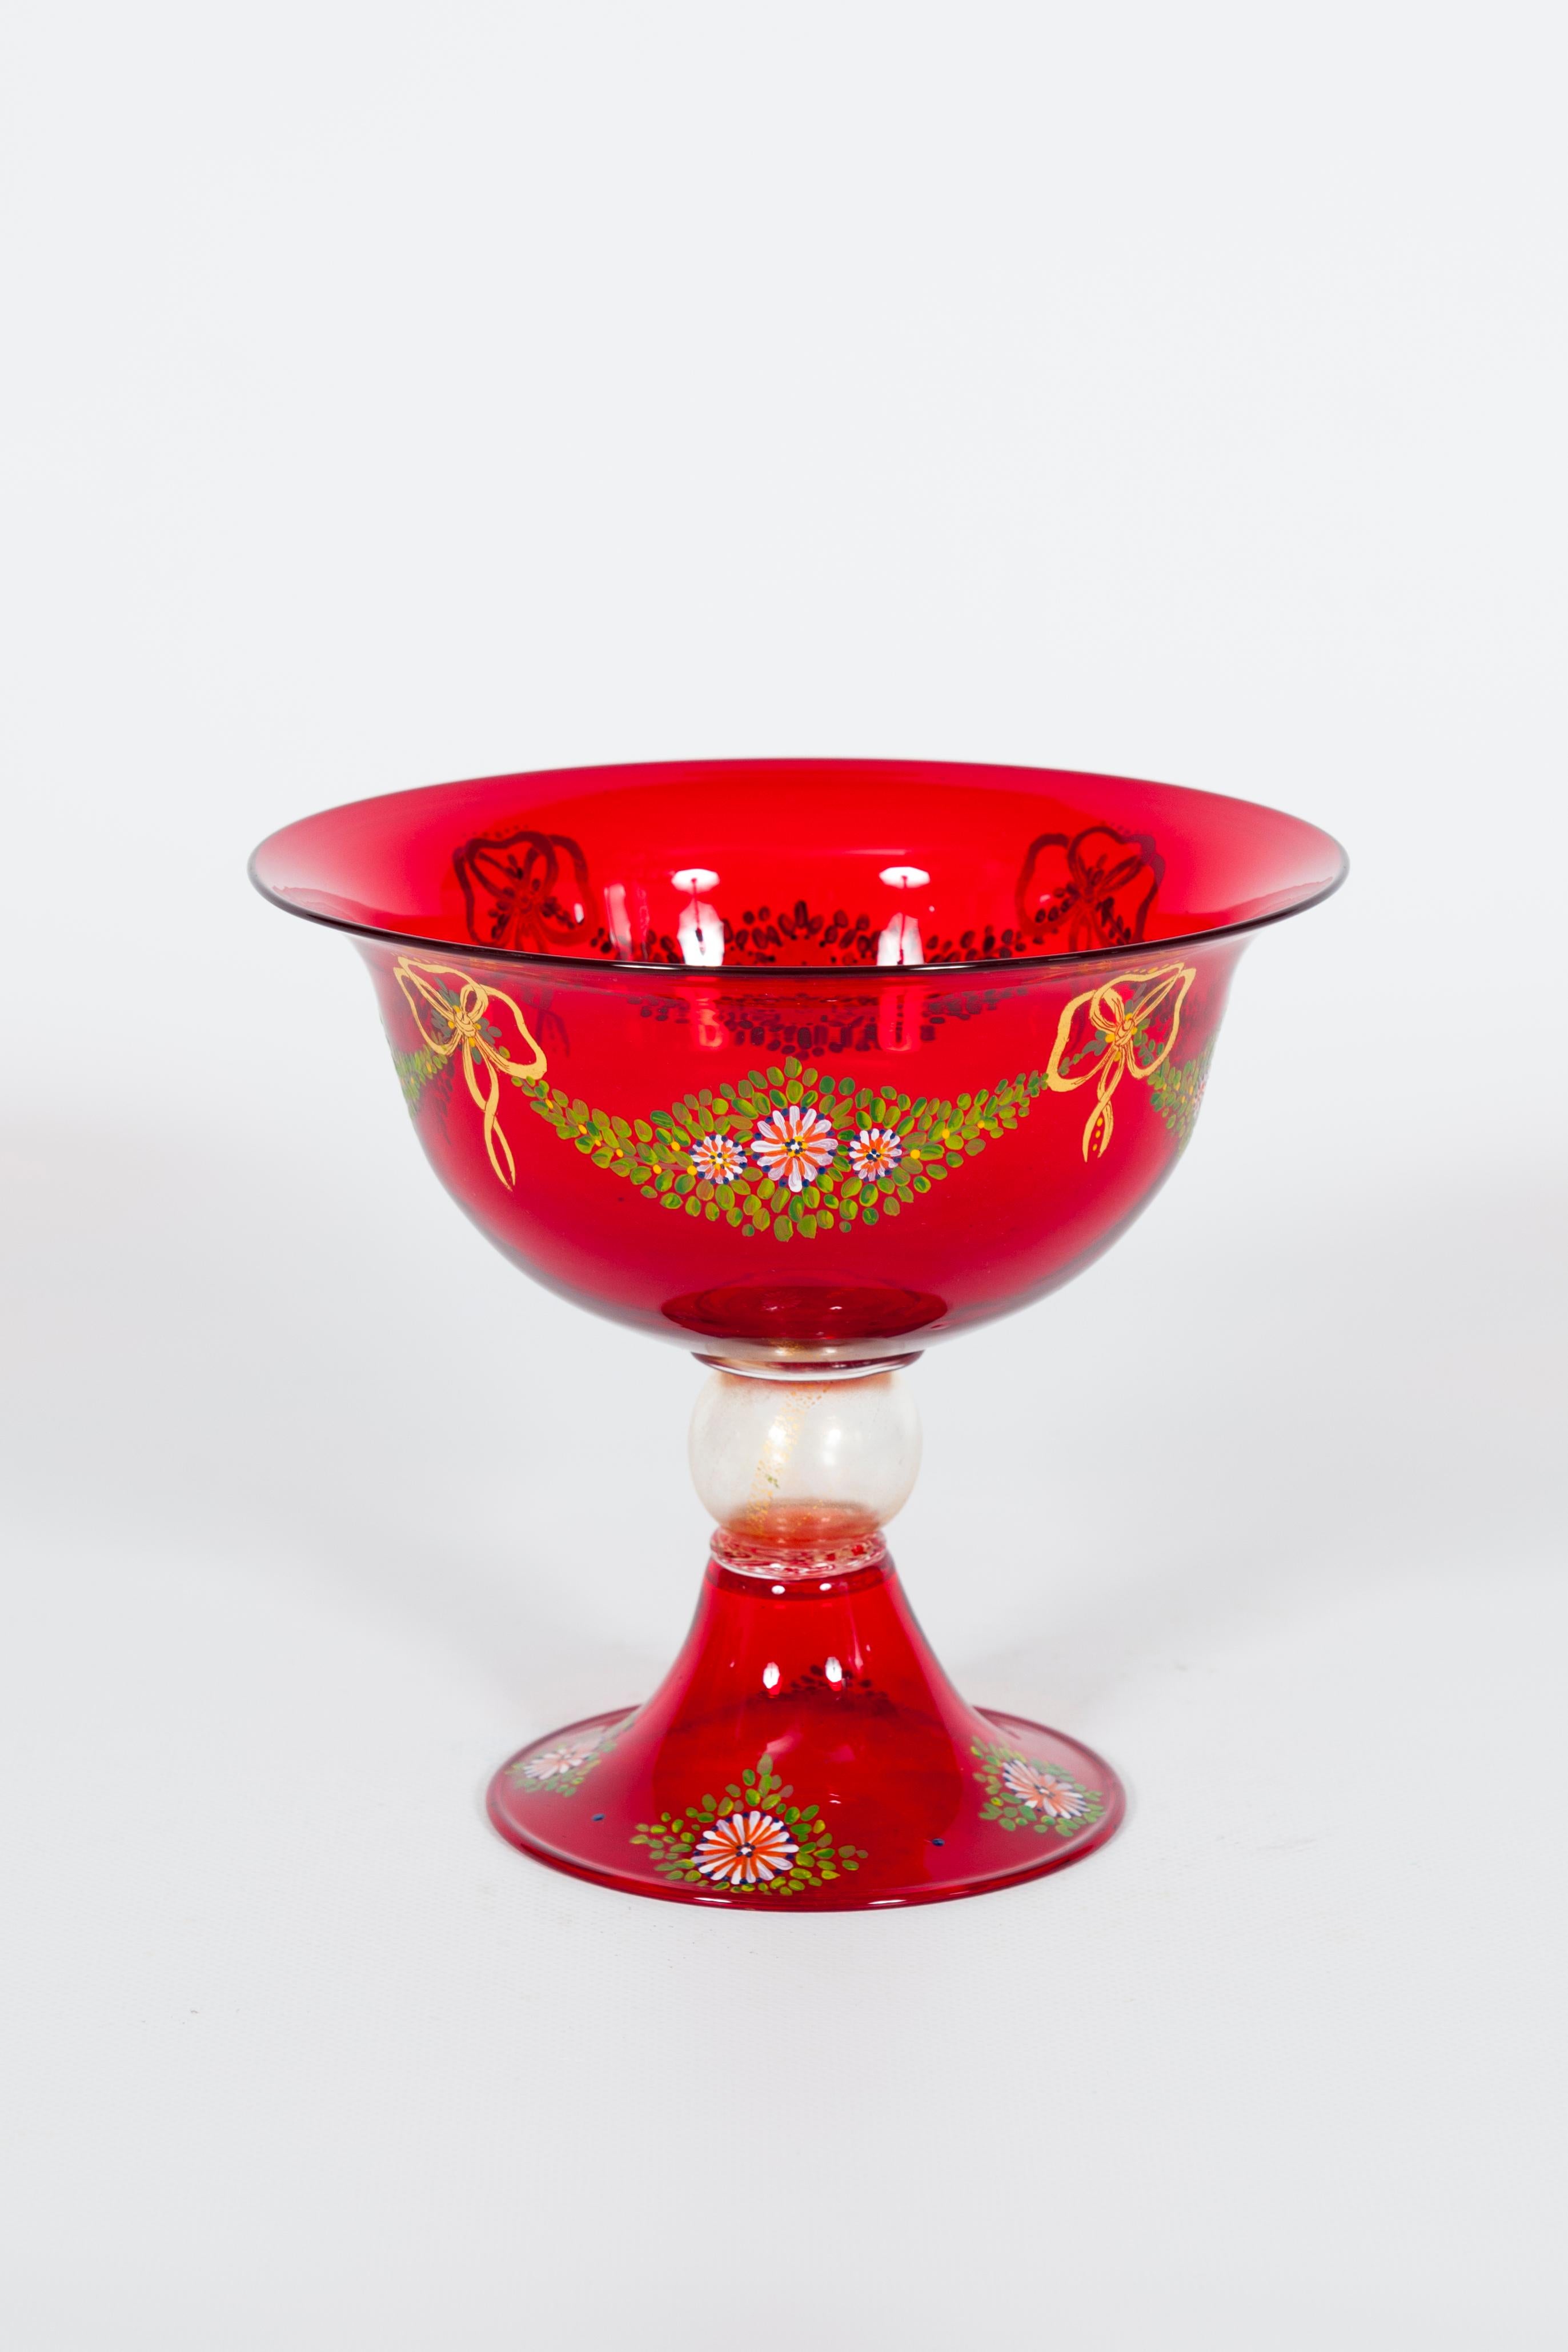 Red Murano Glass Goblet with Hand-Painted Garlands Attributed to Caramea, 1990s For Sale 3